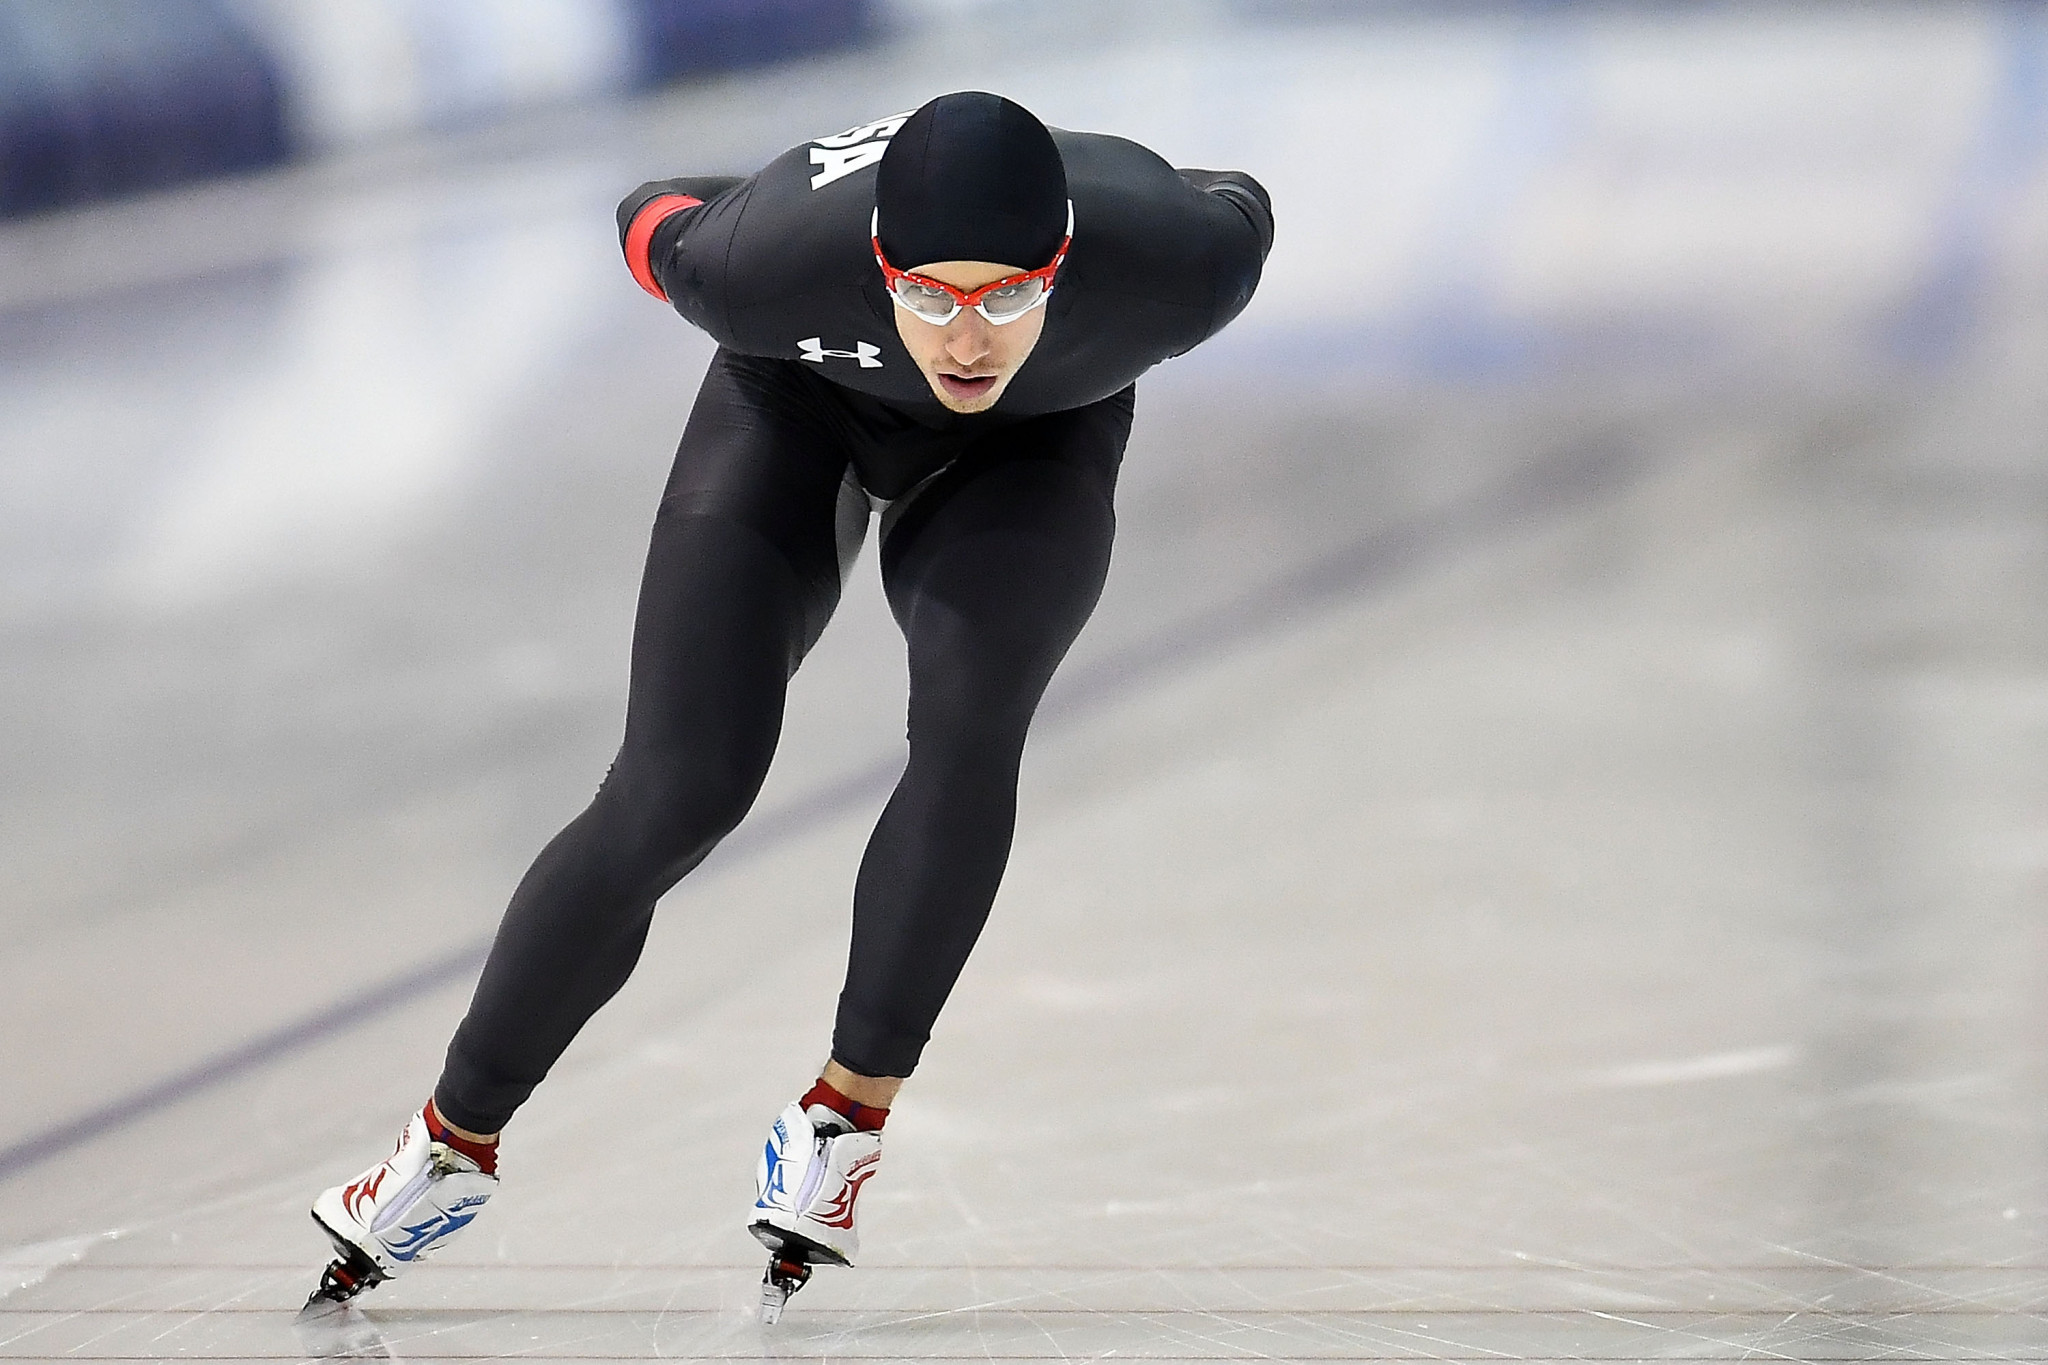 Emery Lehman won the men's 5,000m race at the event ©Getty Images